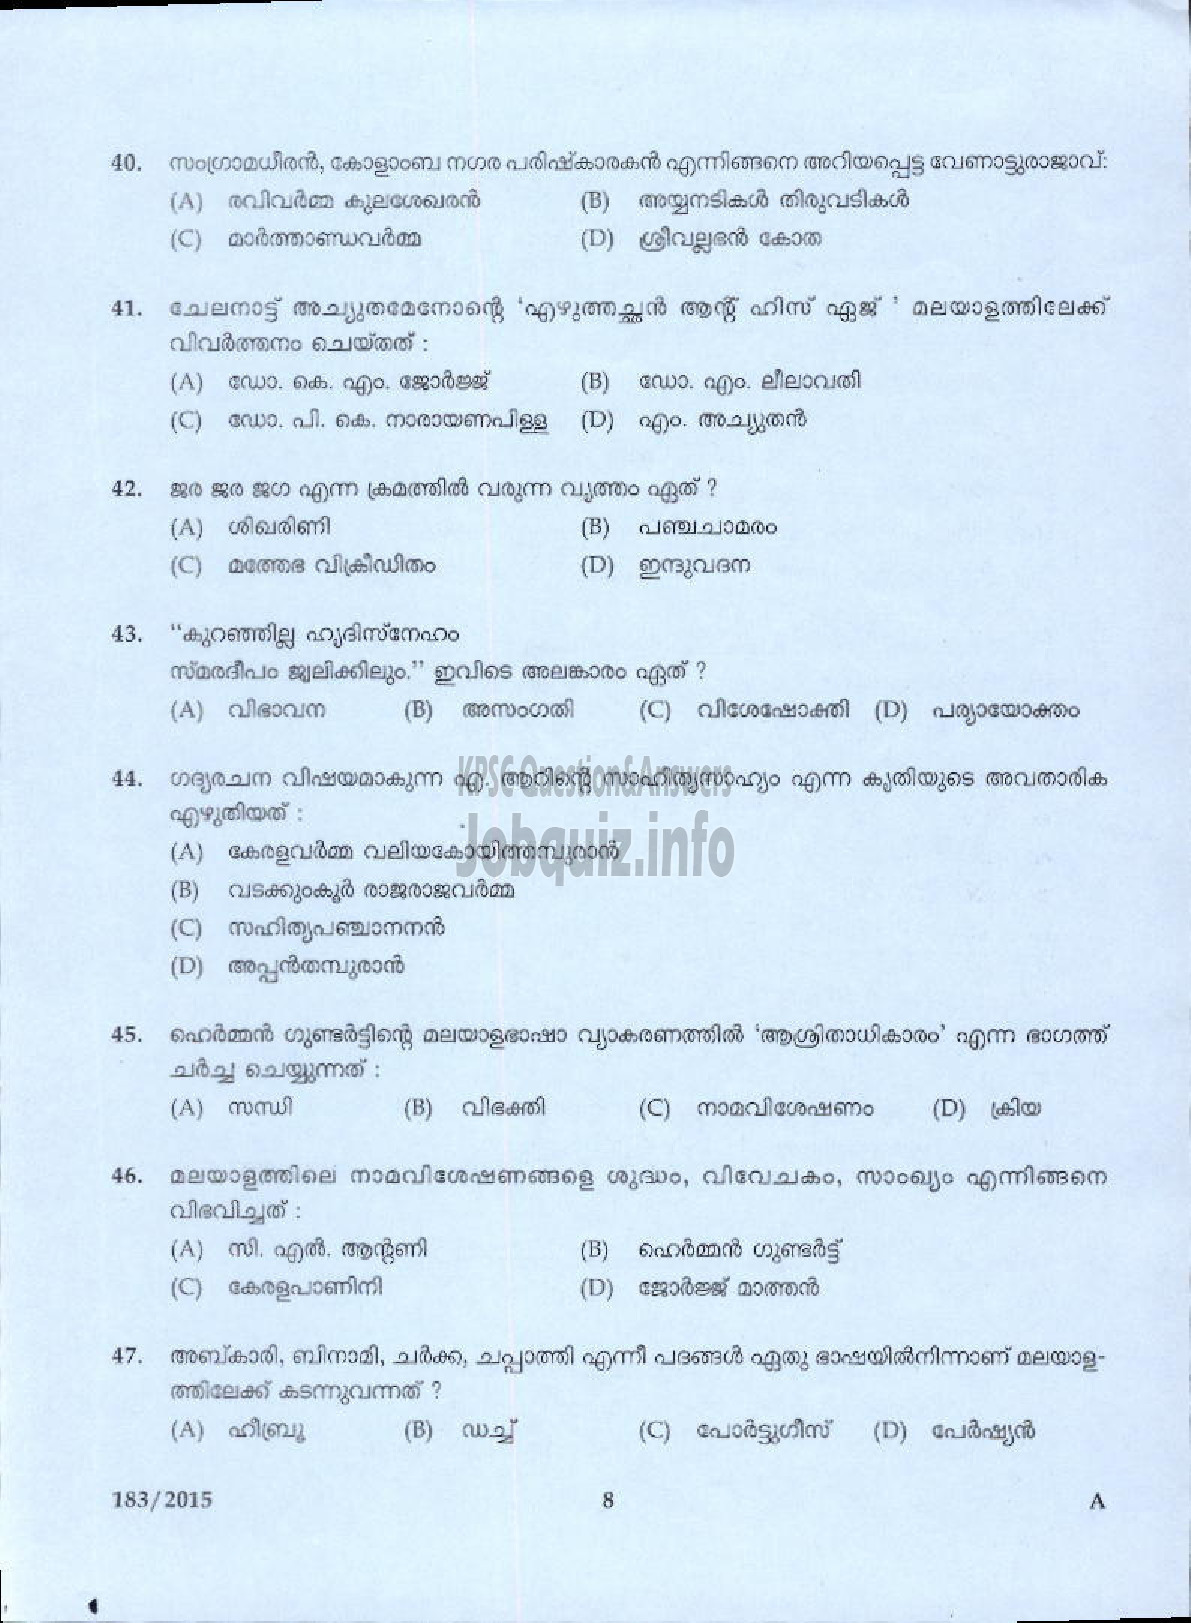 Kerala PSC Question Paper - LECTURER IN MALAYALAM COLLEGIATE EDUCATION-6